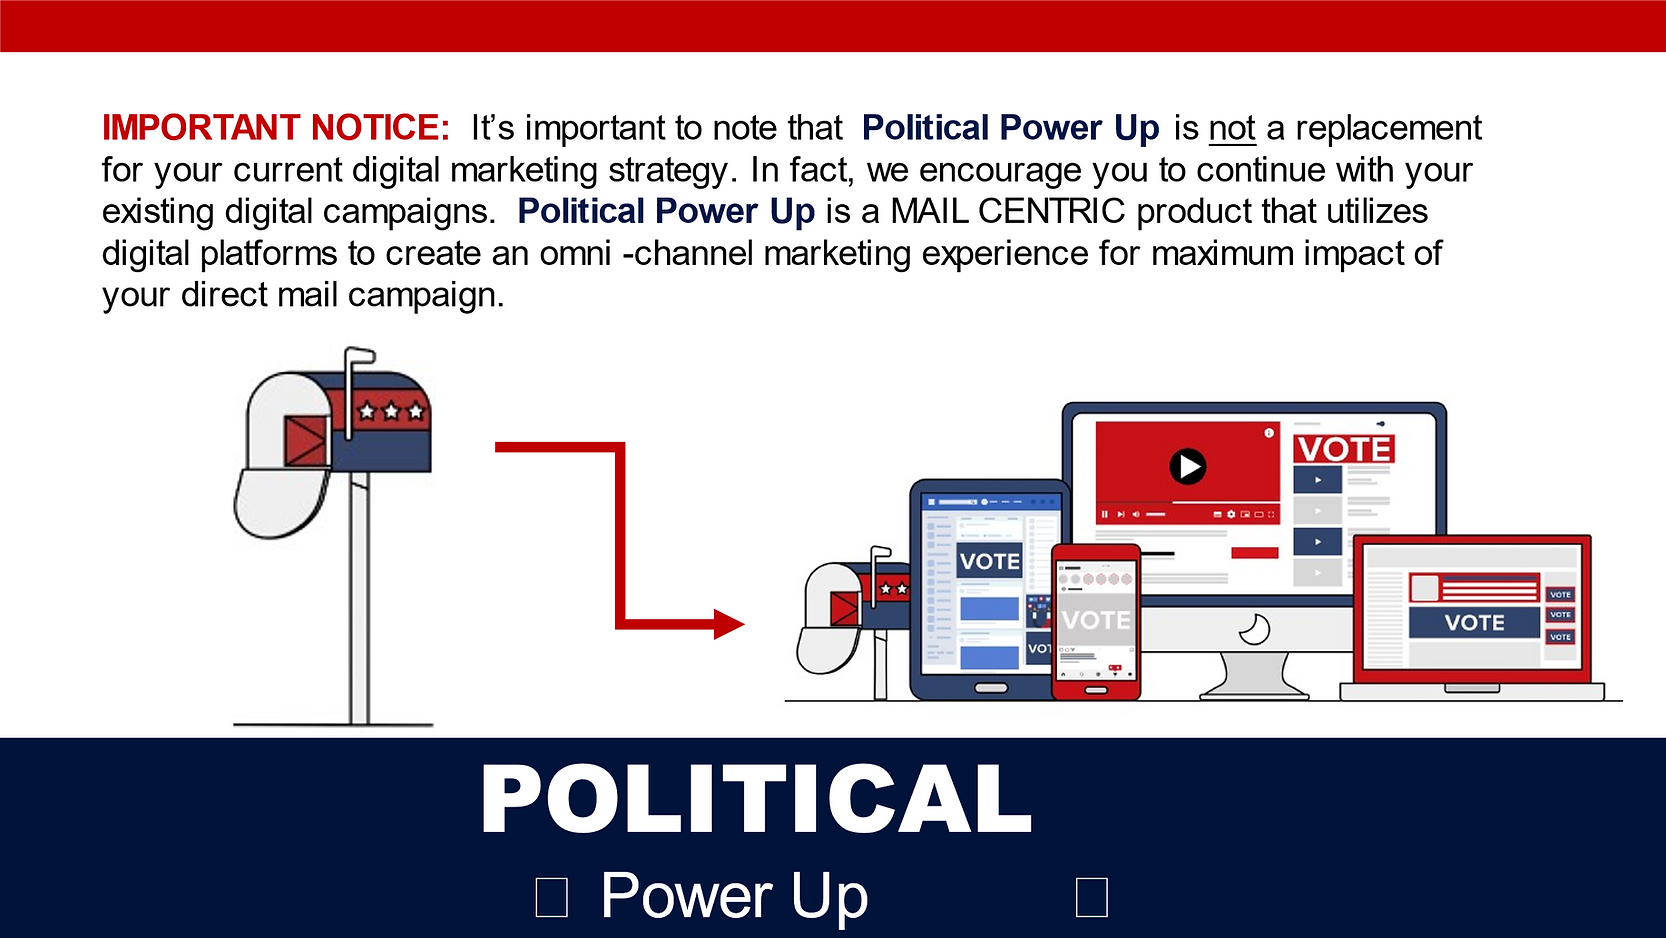 Political Power Up – Mail Centric Product